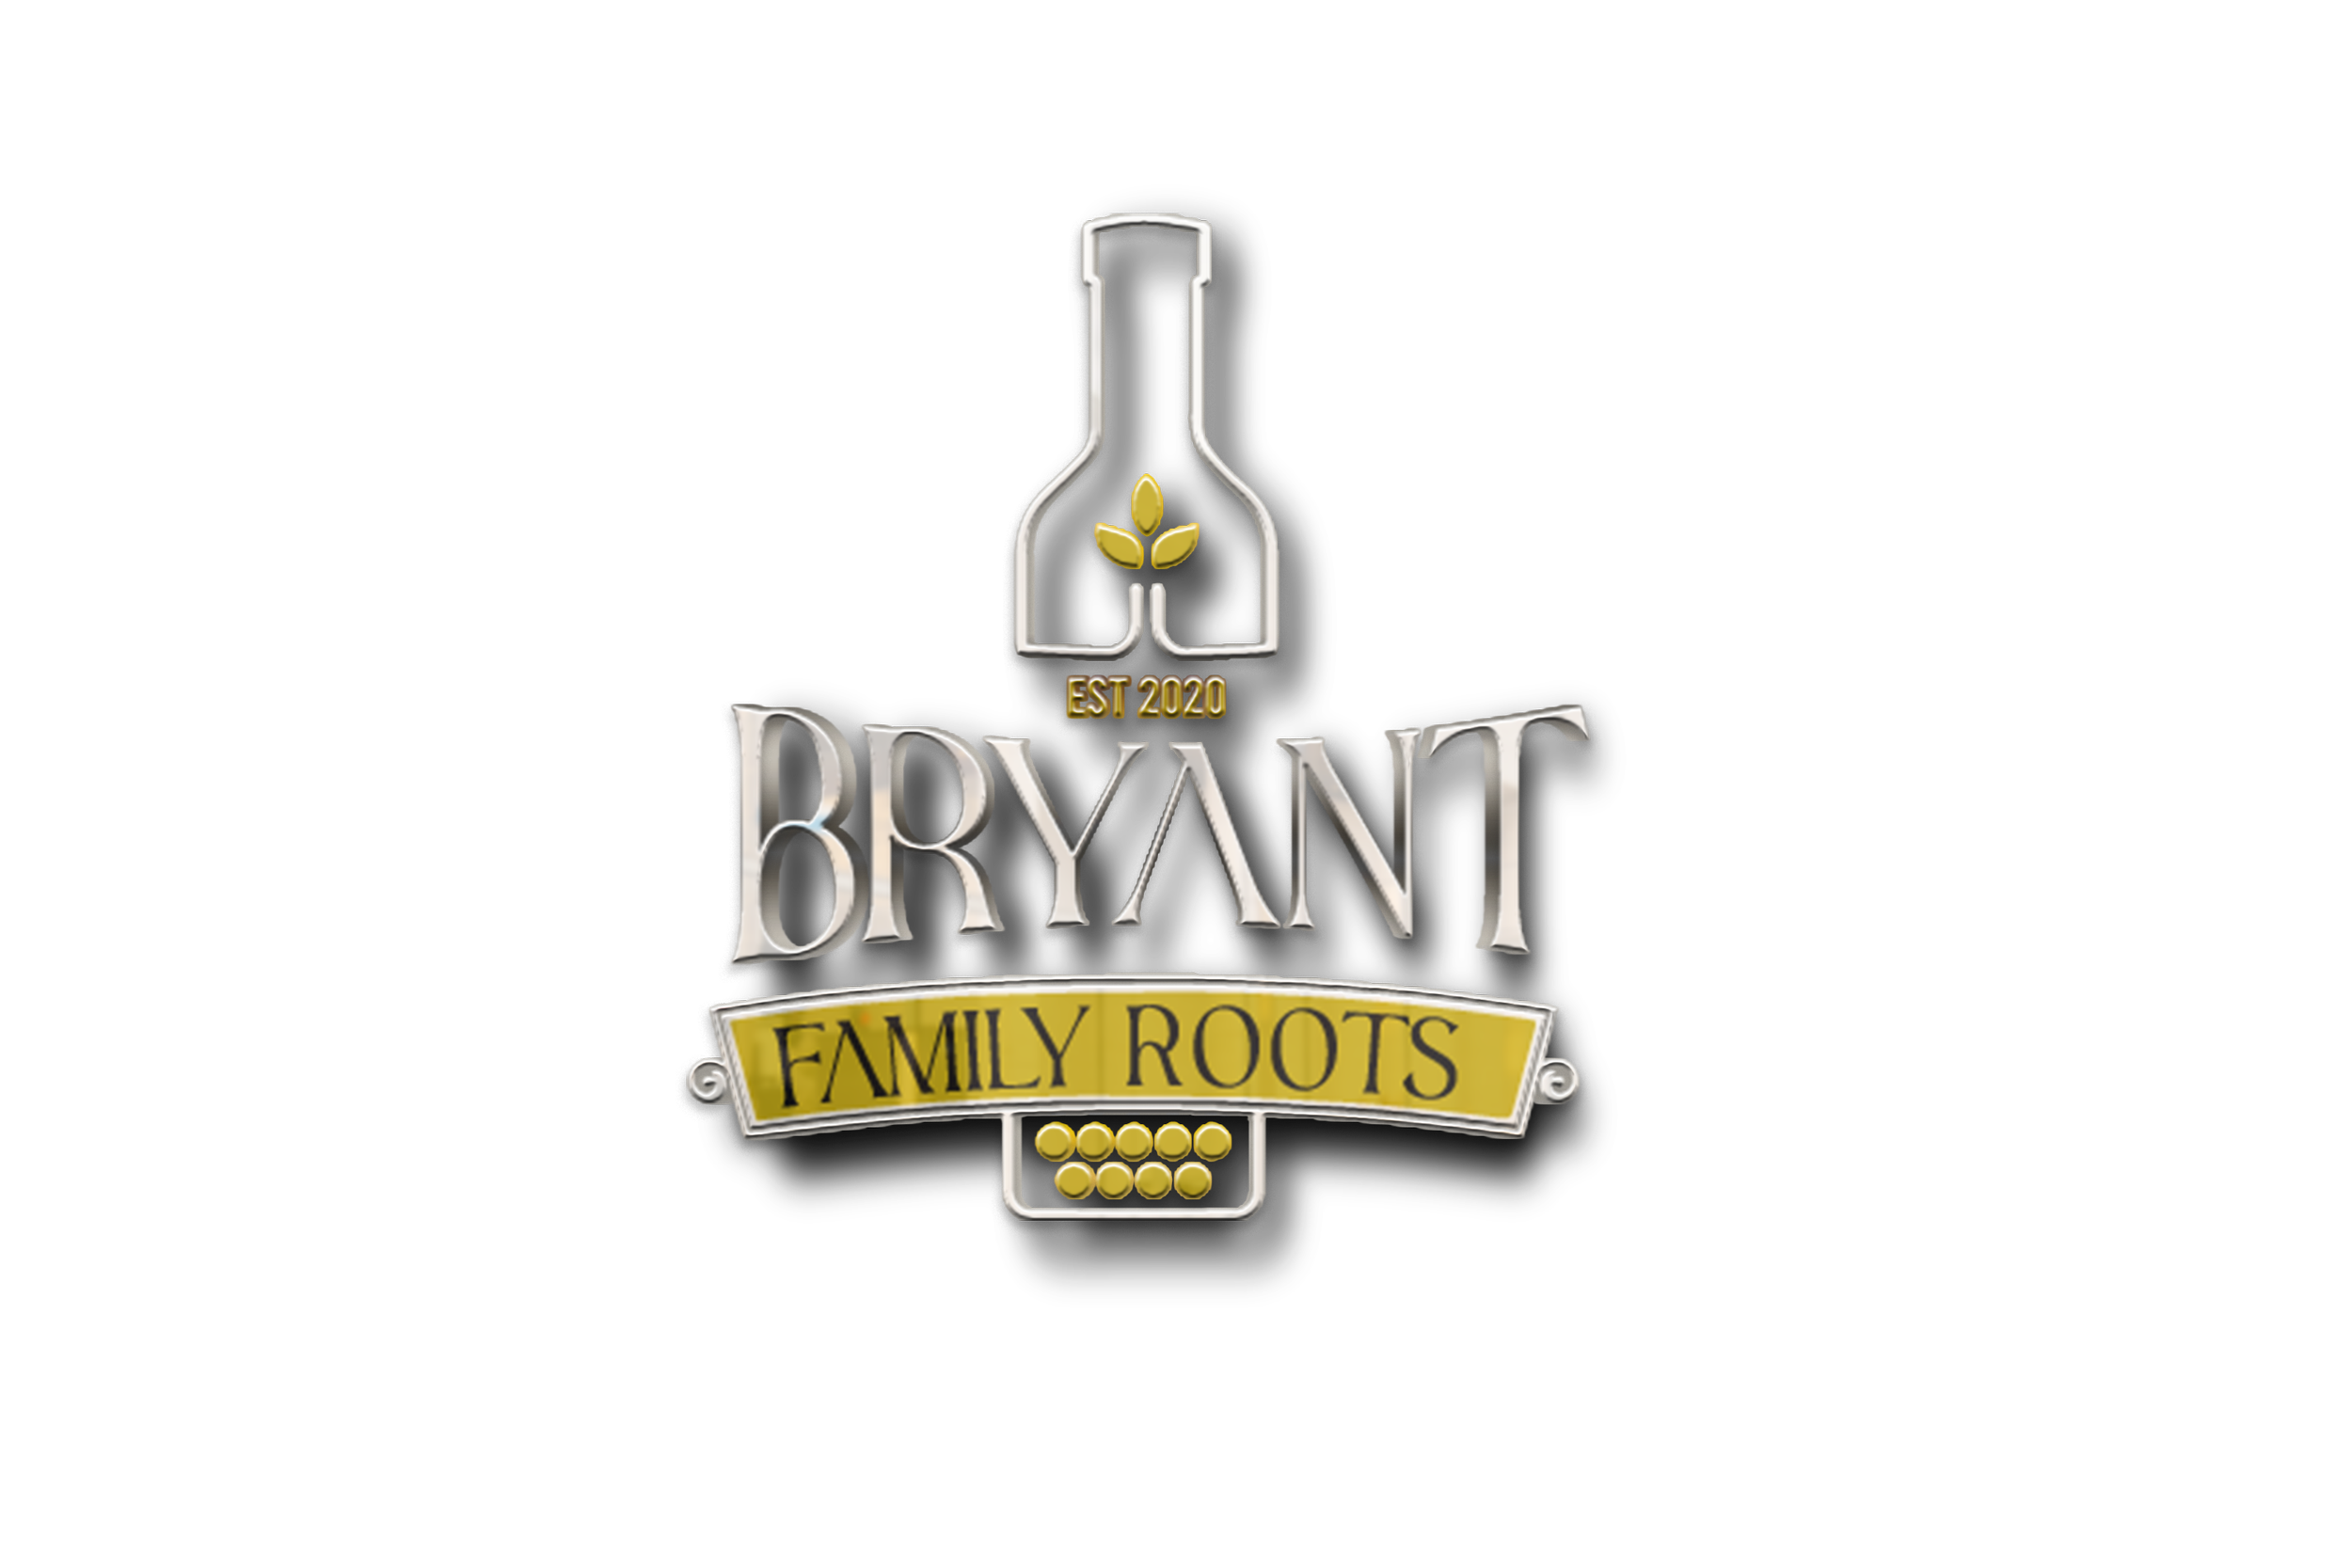 Lee Bryant Family Roots.png